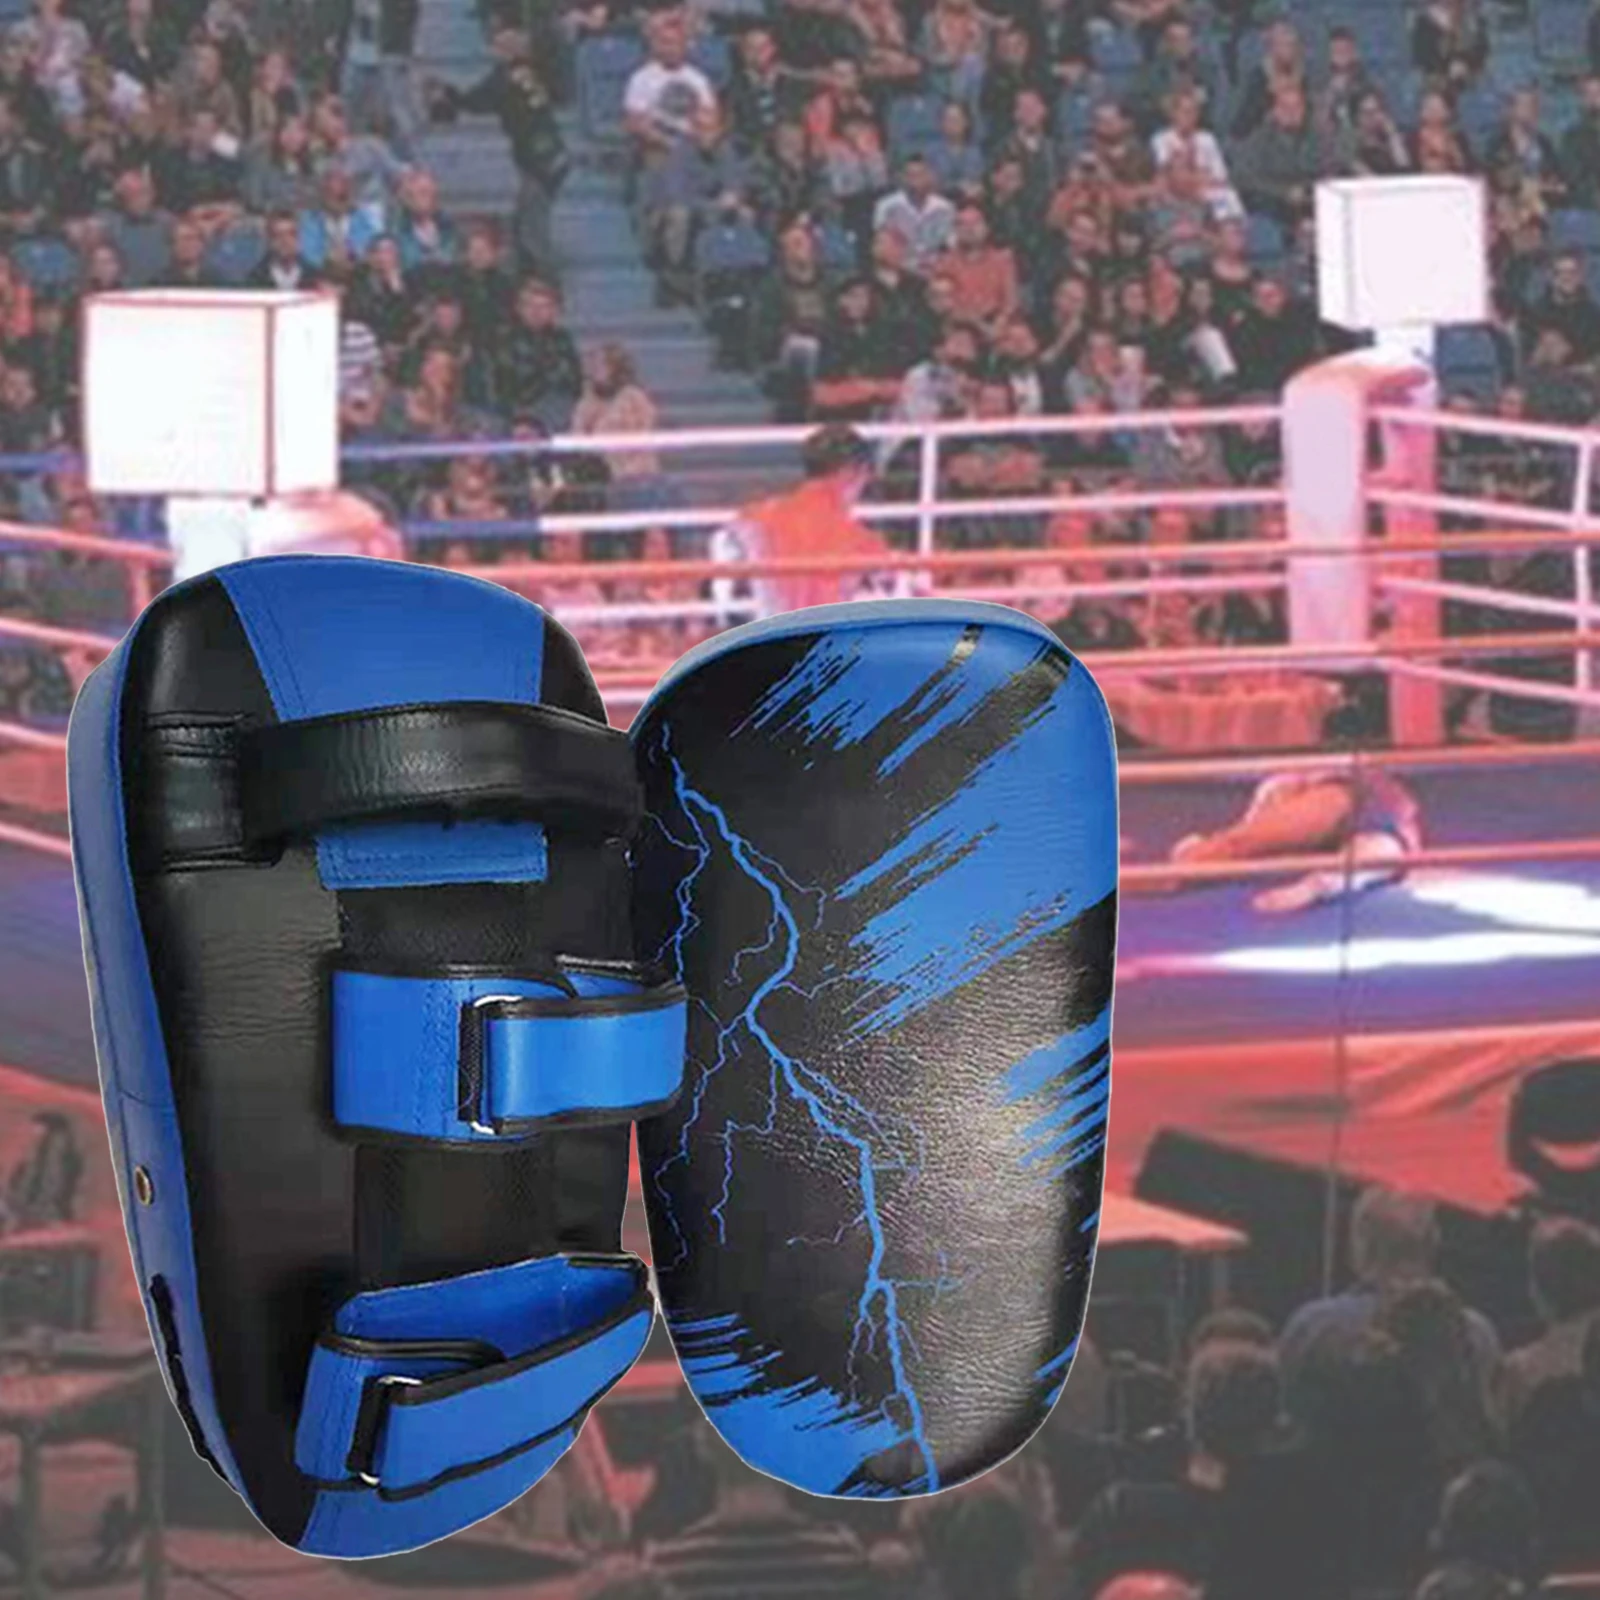 Kick Strike Shield Curved Pad Boxing Punch Training Mitts Arm Focus Target Blue 